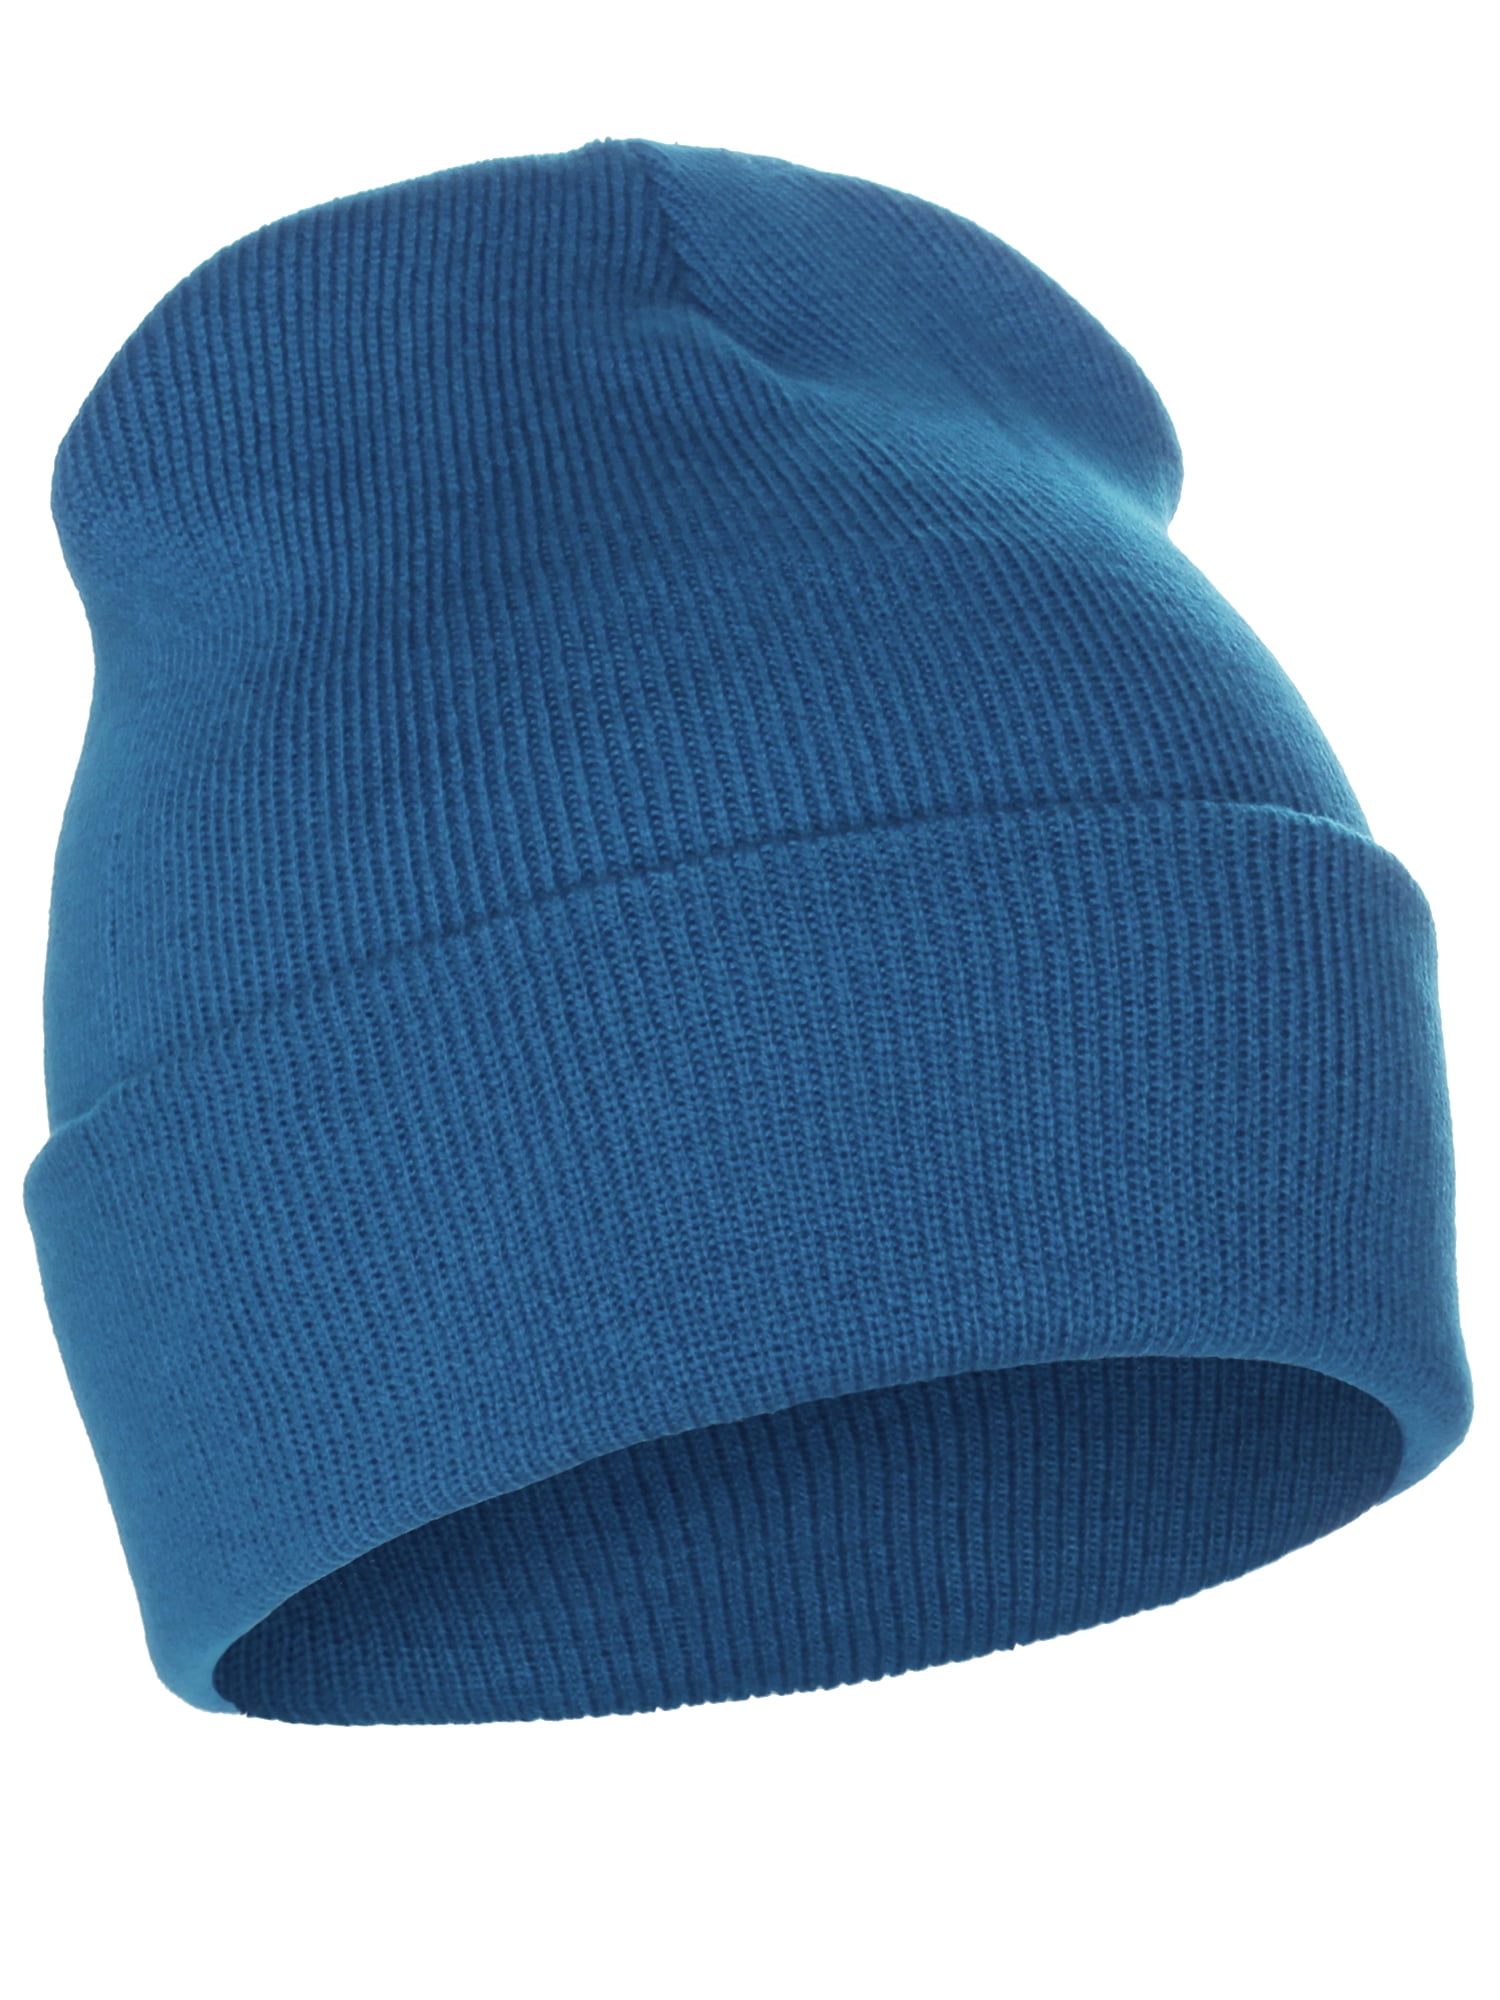 Classic Plain Cuffed Beanie Winter Knit Hat Skully Cap, Turquoise | Beanies